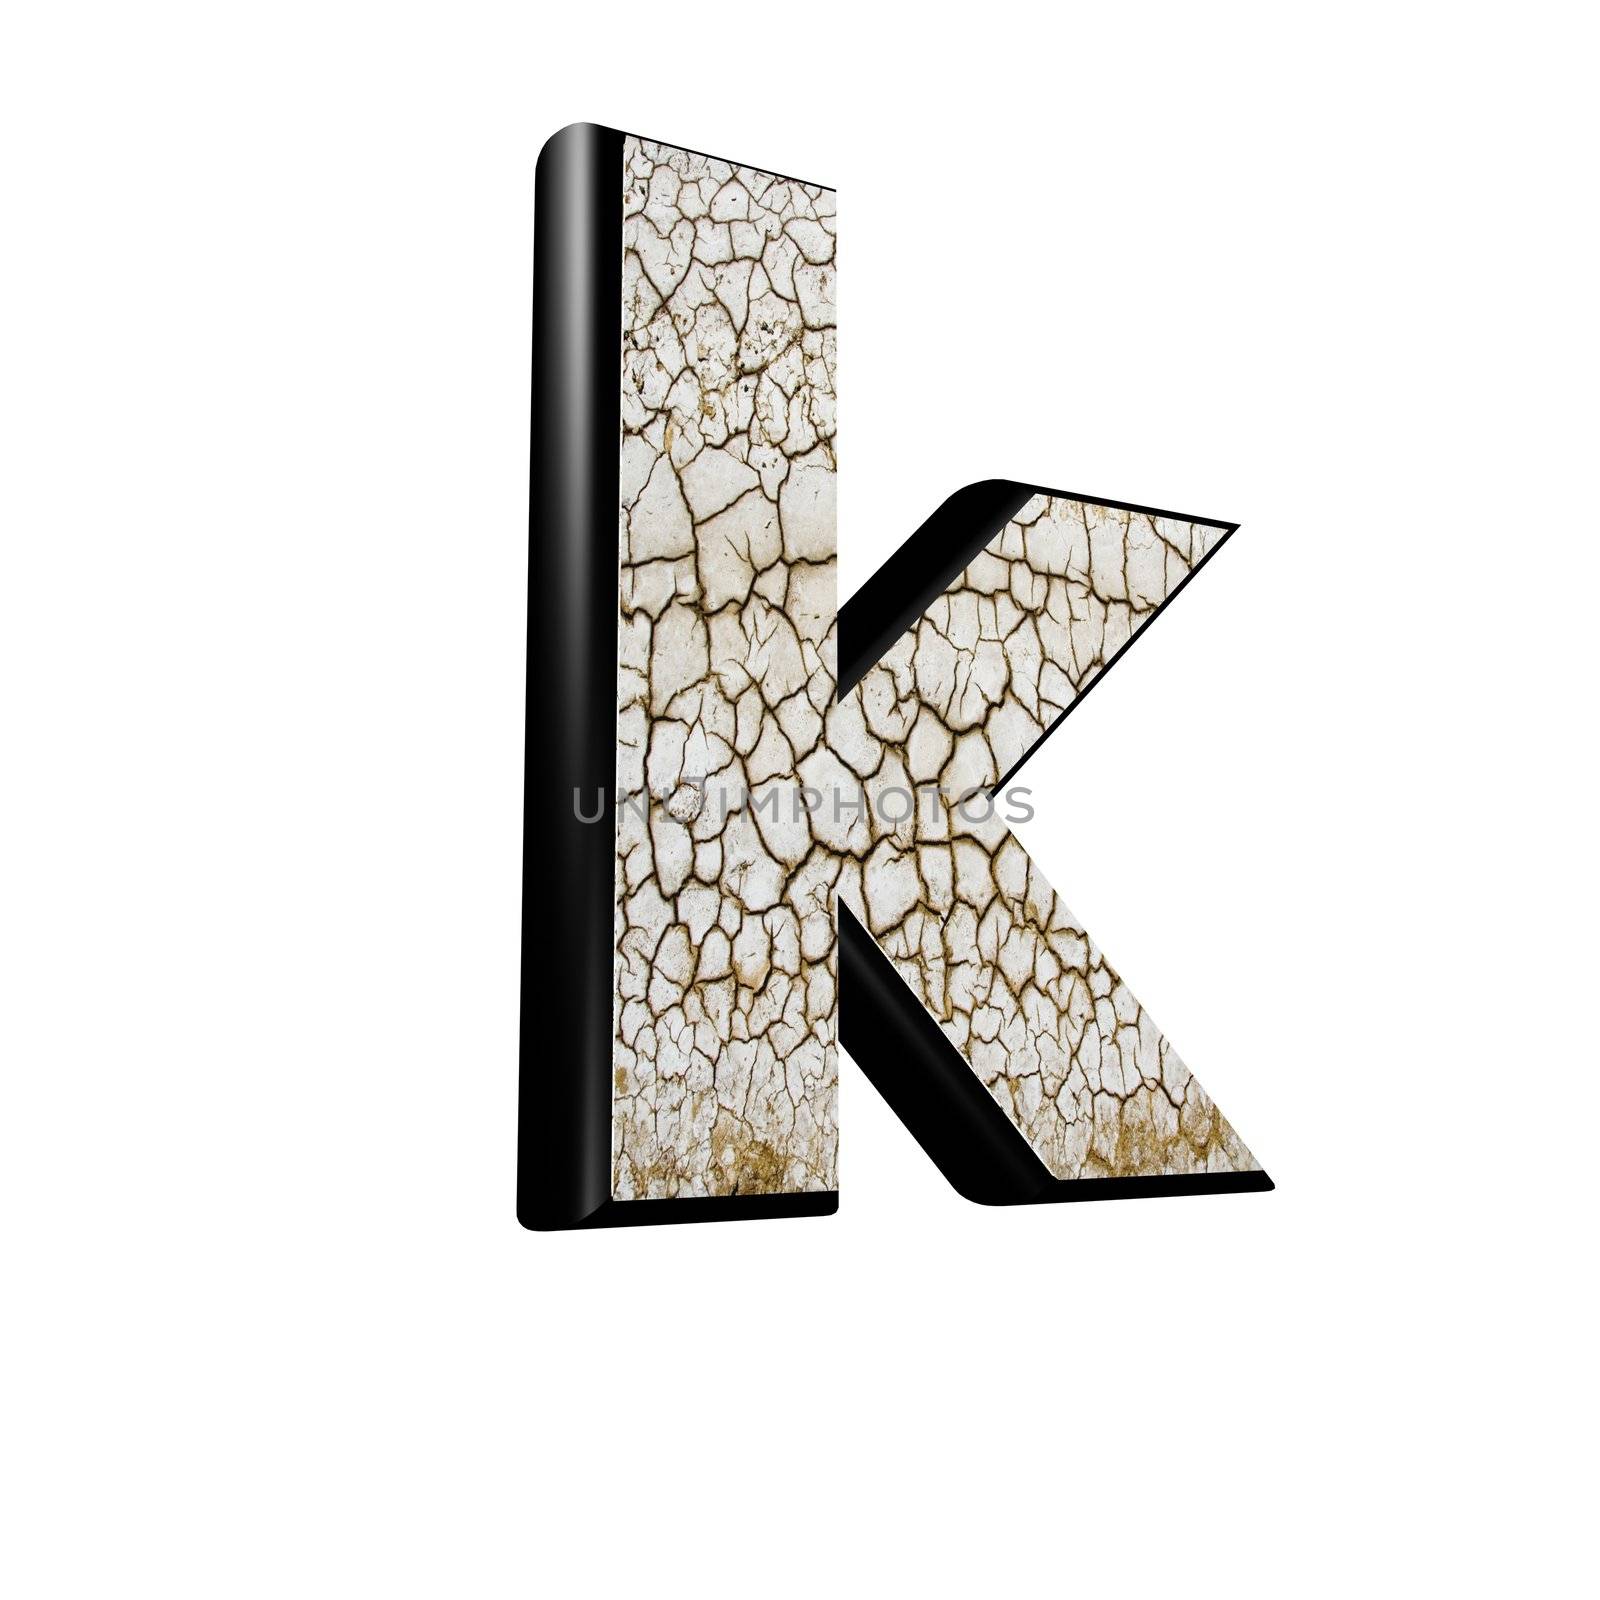 abstract 3d letter with dry ground texture - K by chrisroll